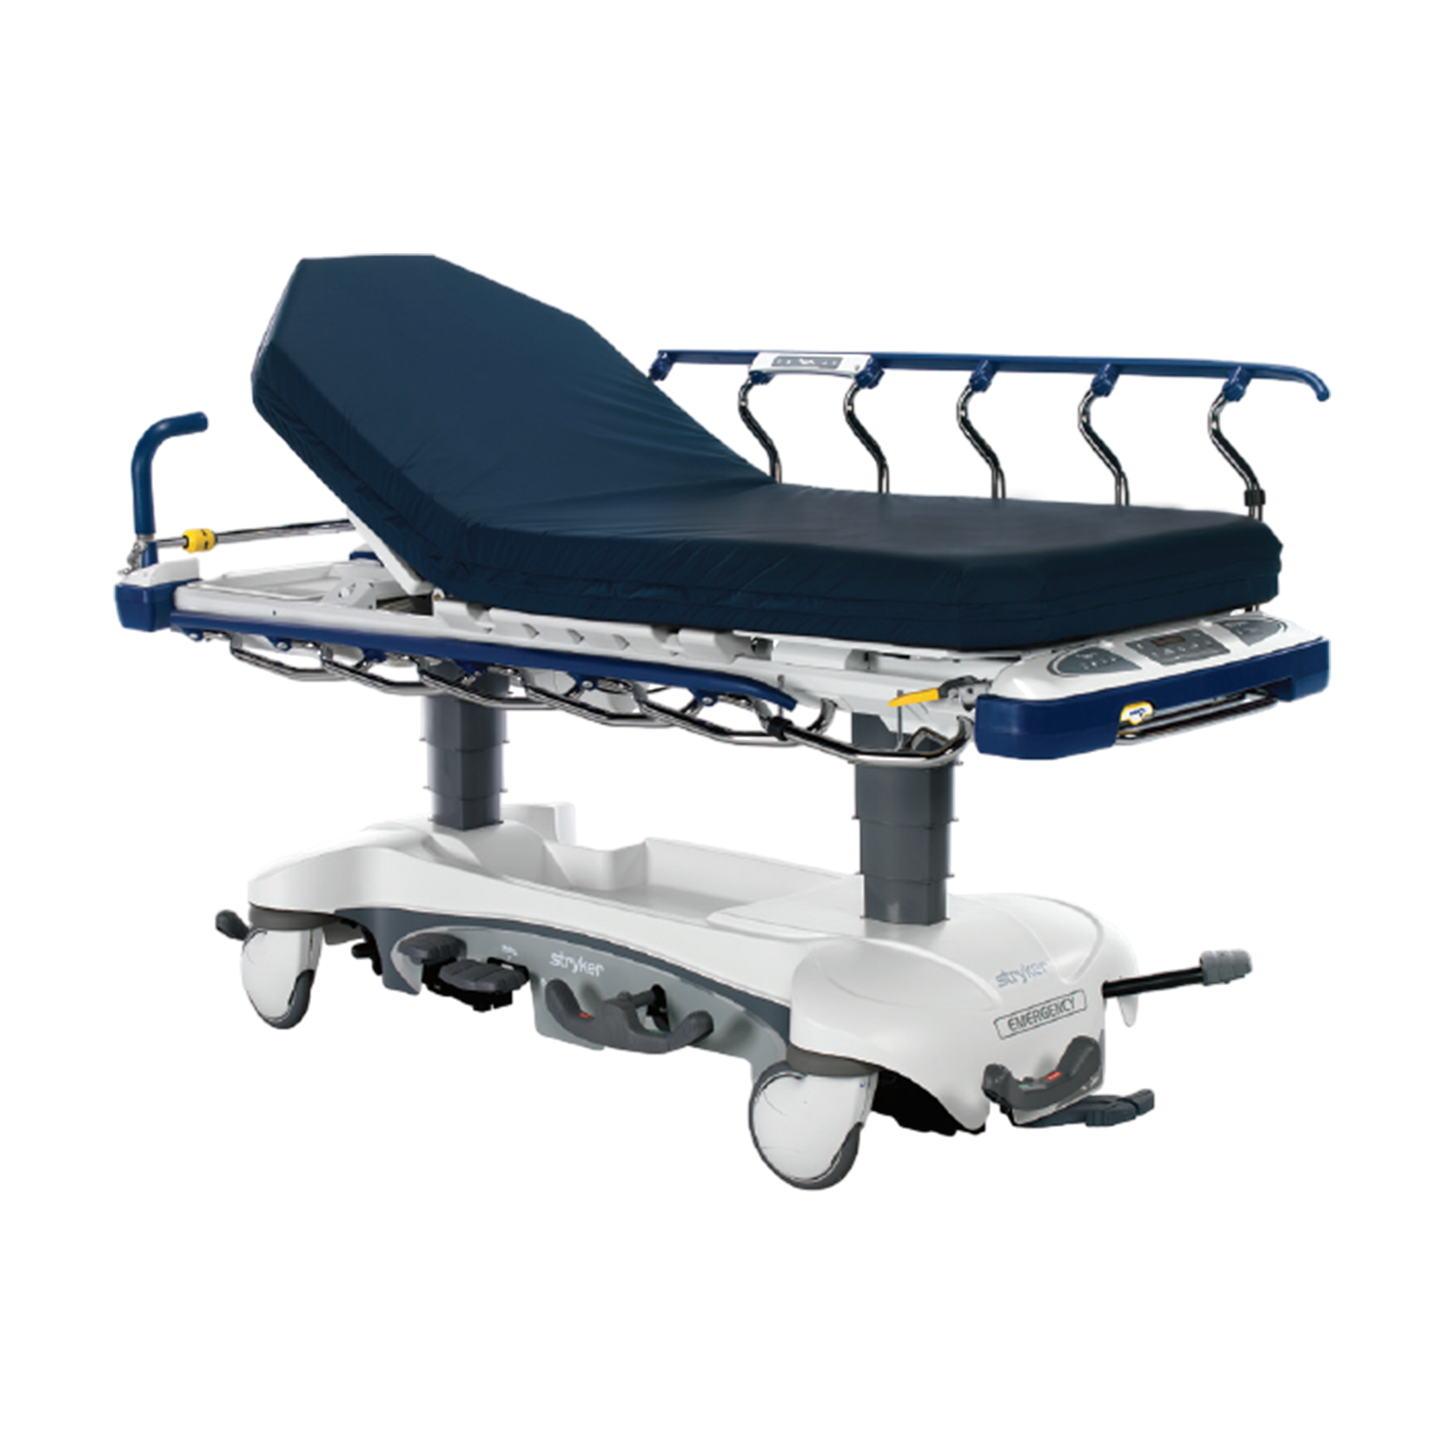 Stryker 1105 5th Wheel Mobility Prime Series Stretcher